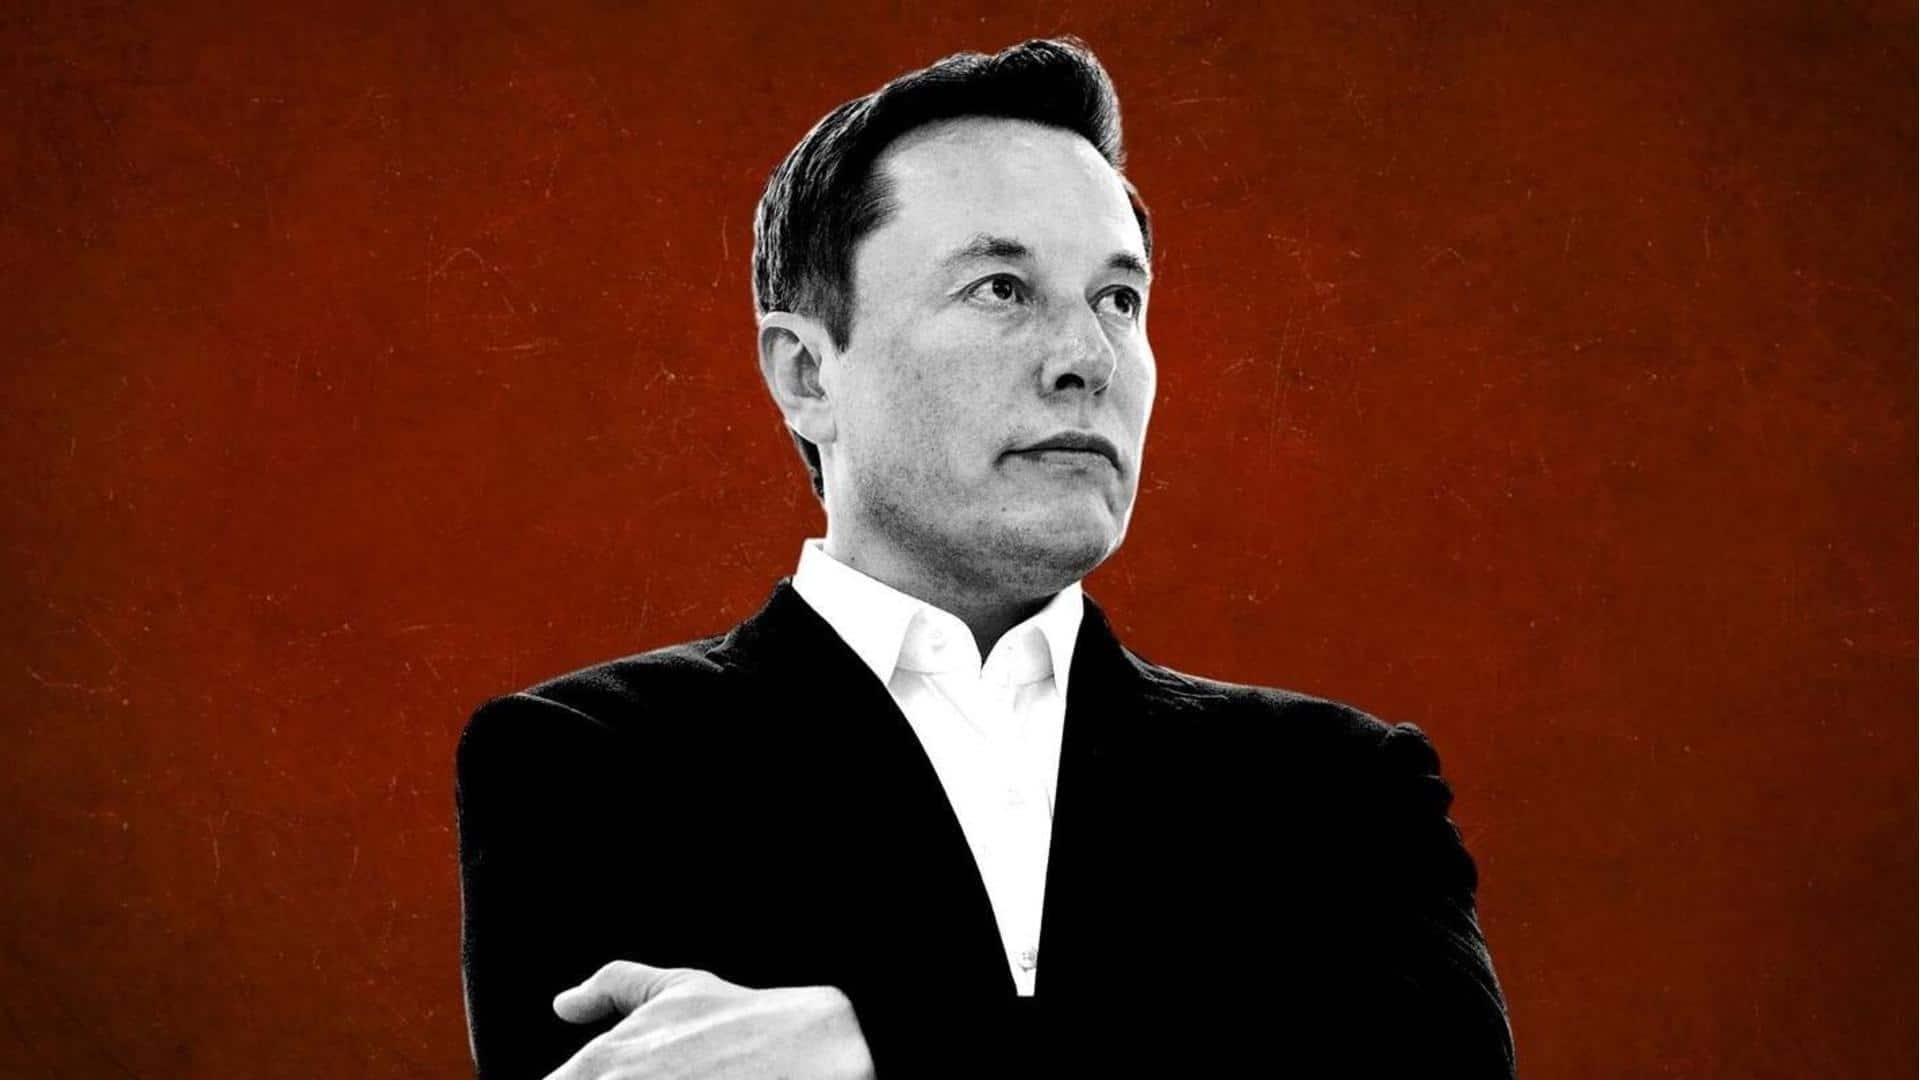 'Ready to lose money than curb my opinions': Elon Musk